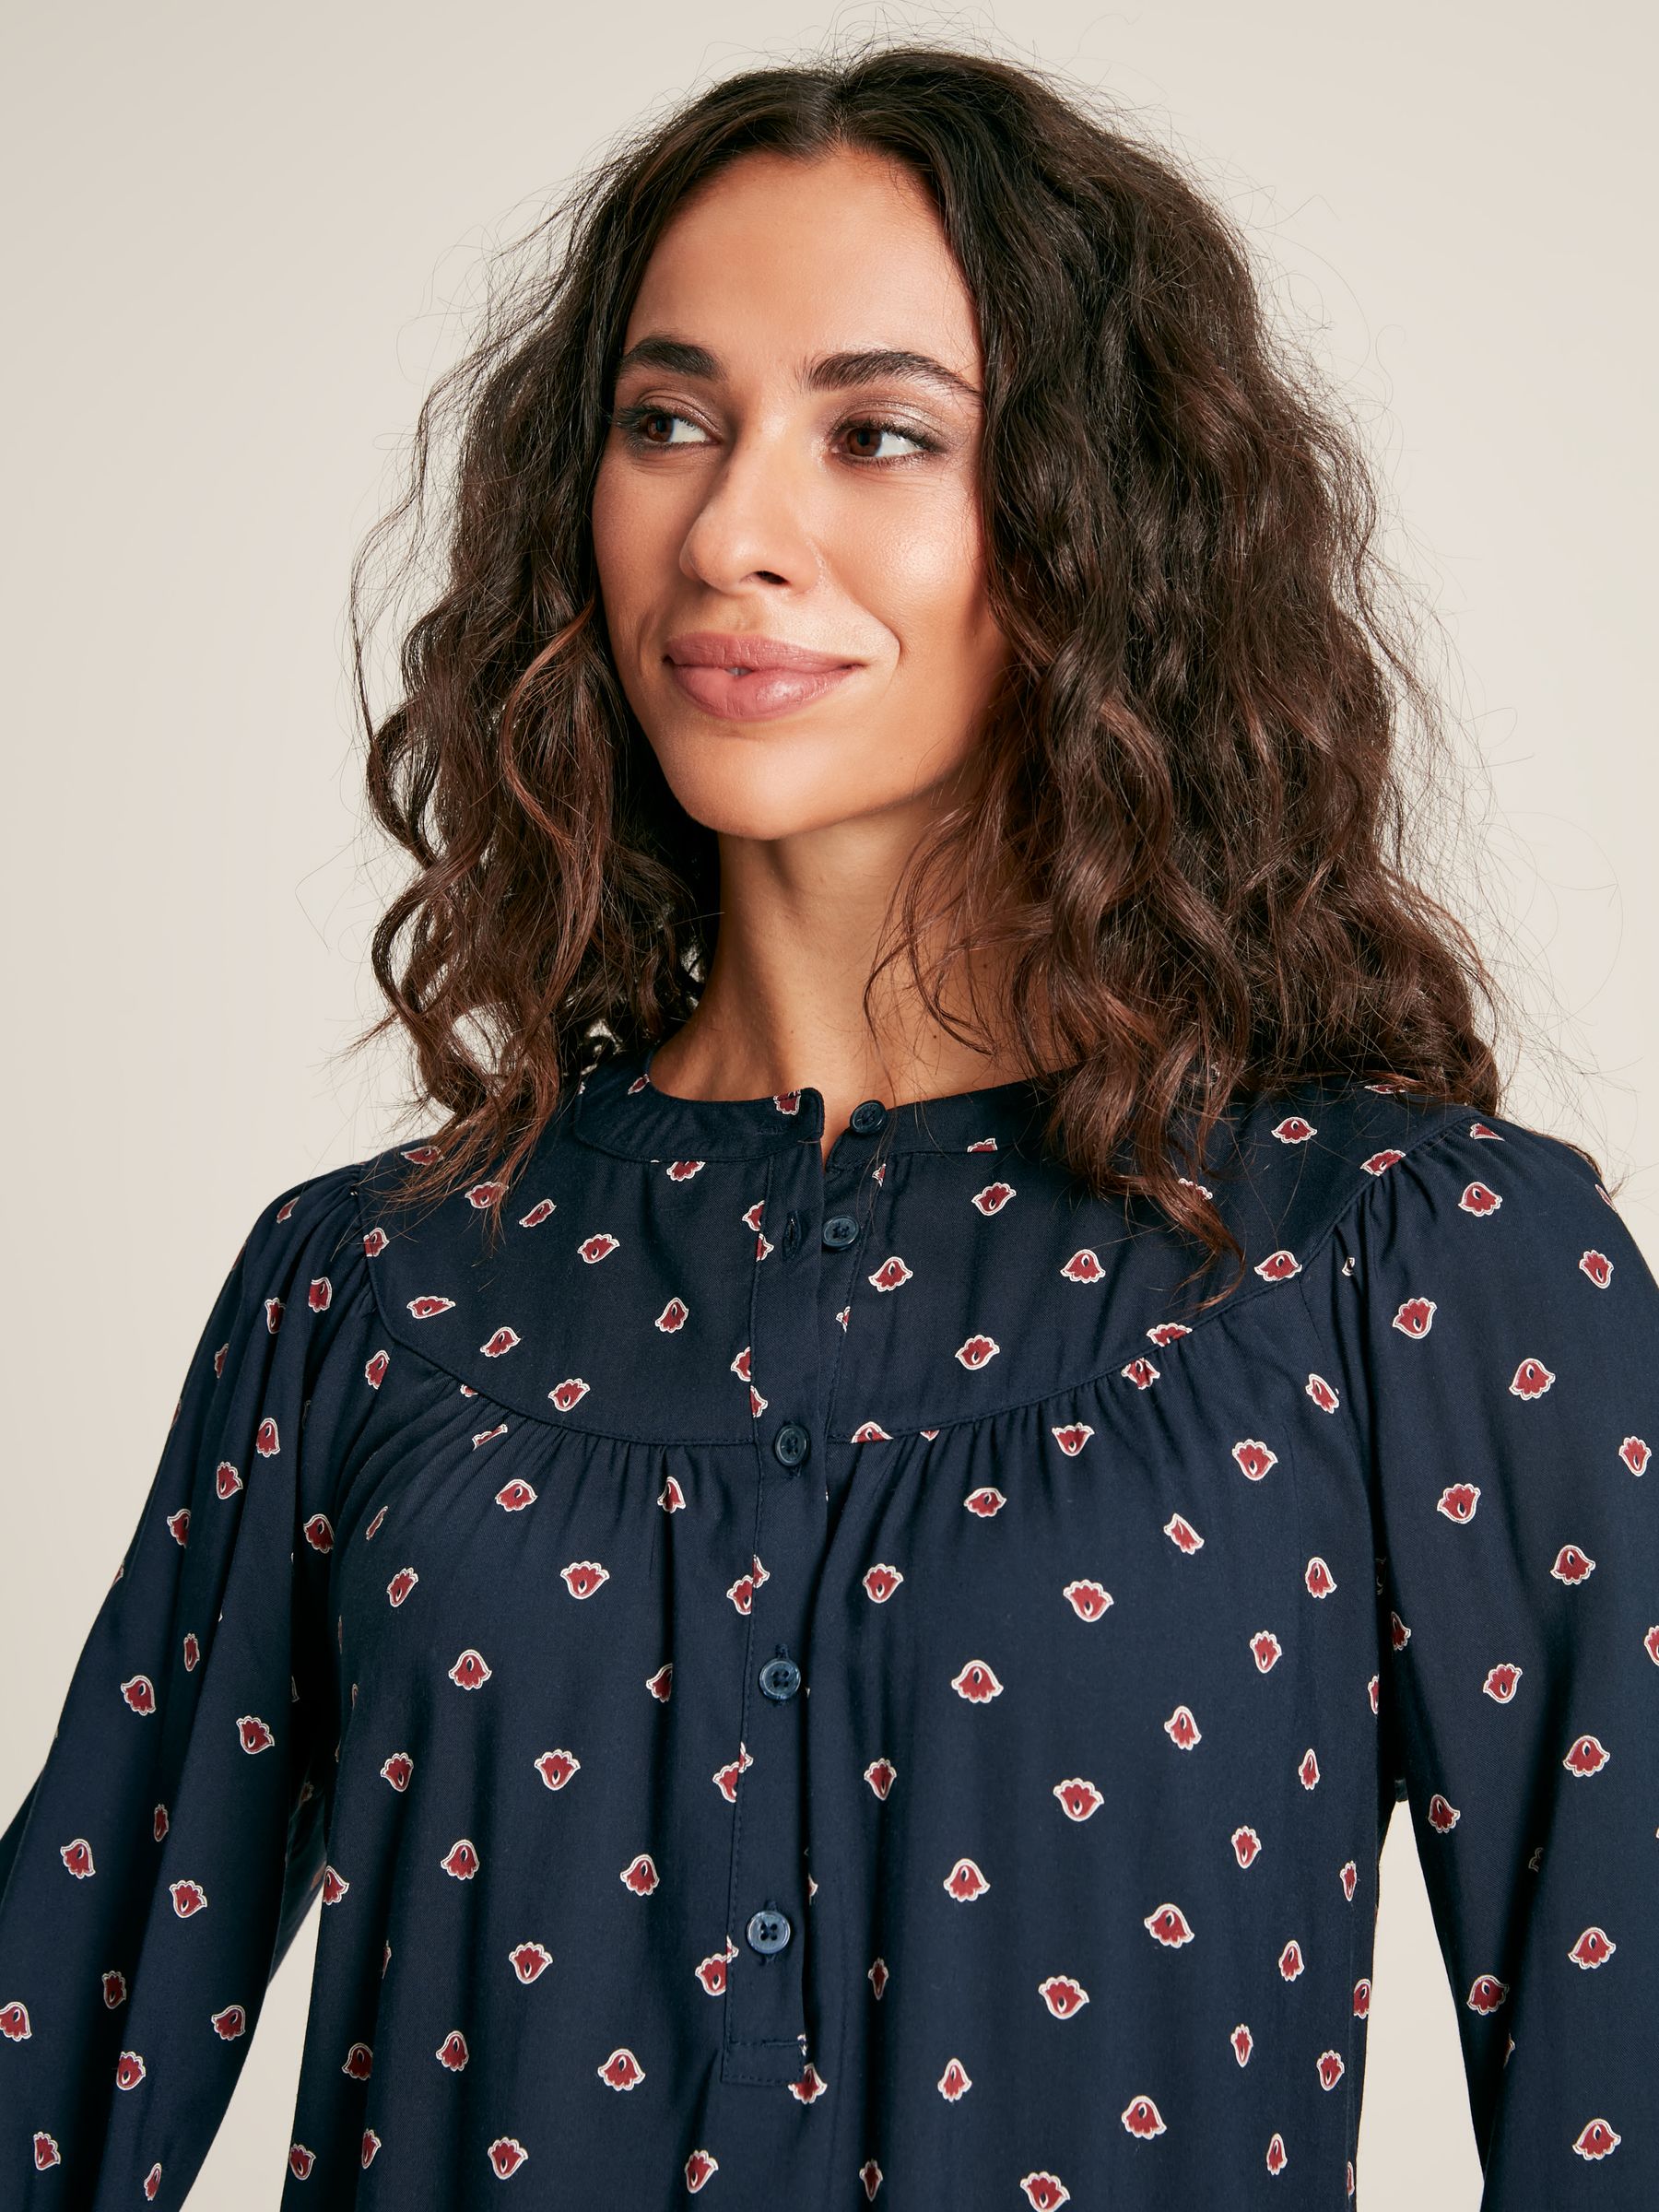 Buy Myra Navy Printed Balloon Sleeve Blouse from the Joules online shop